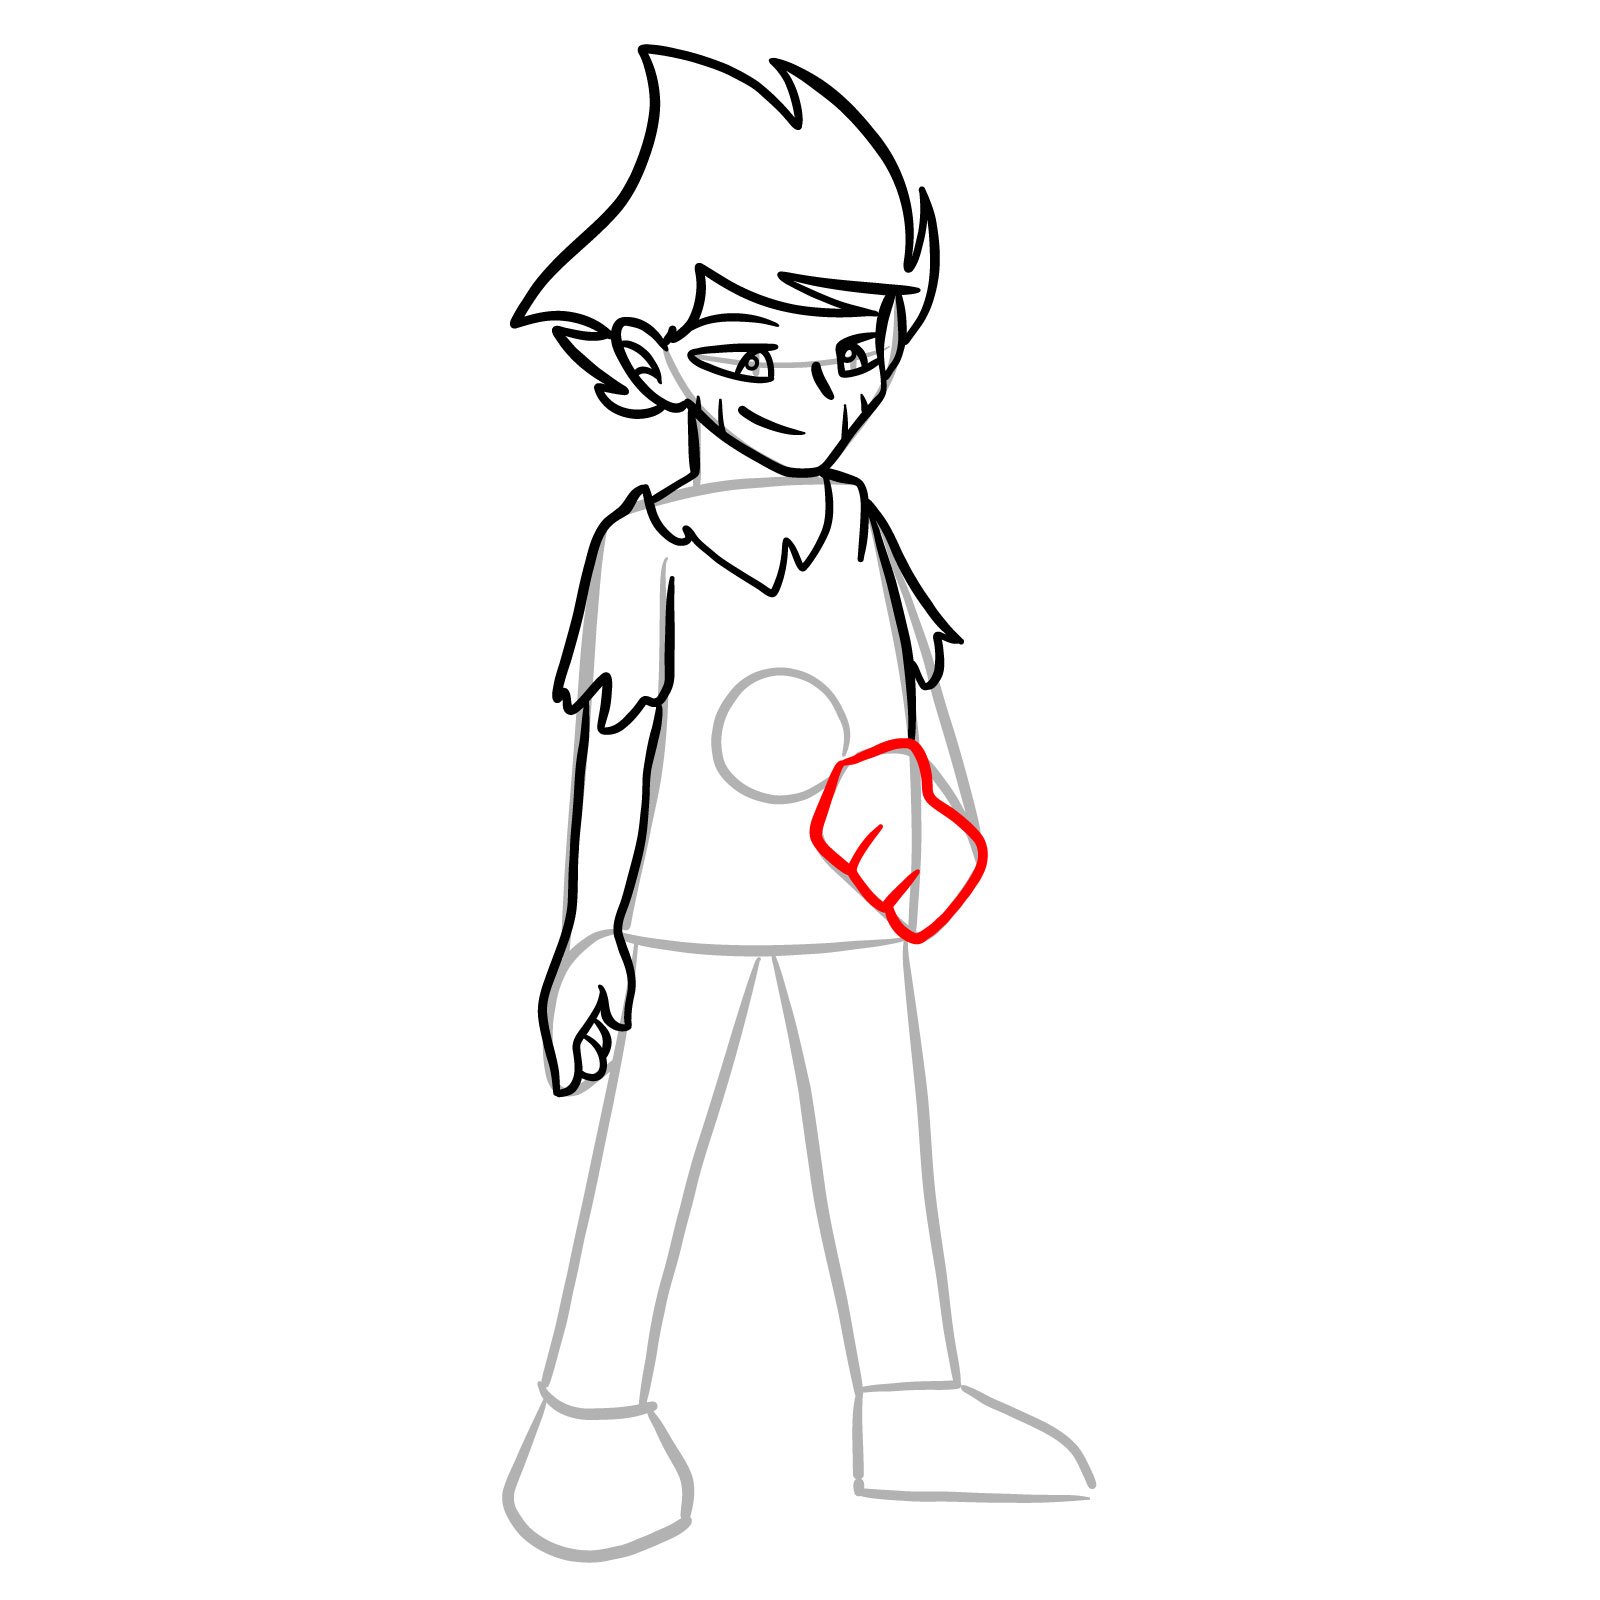 How to draw Bosip from FNF - step 19